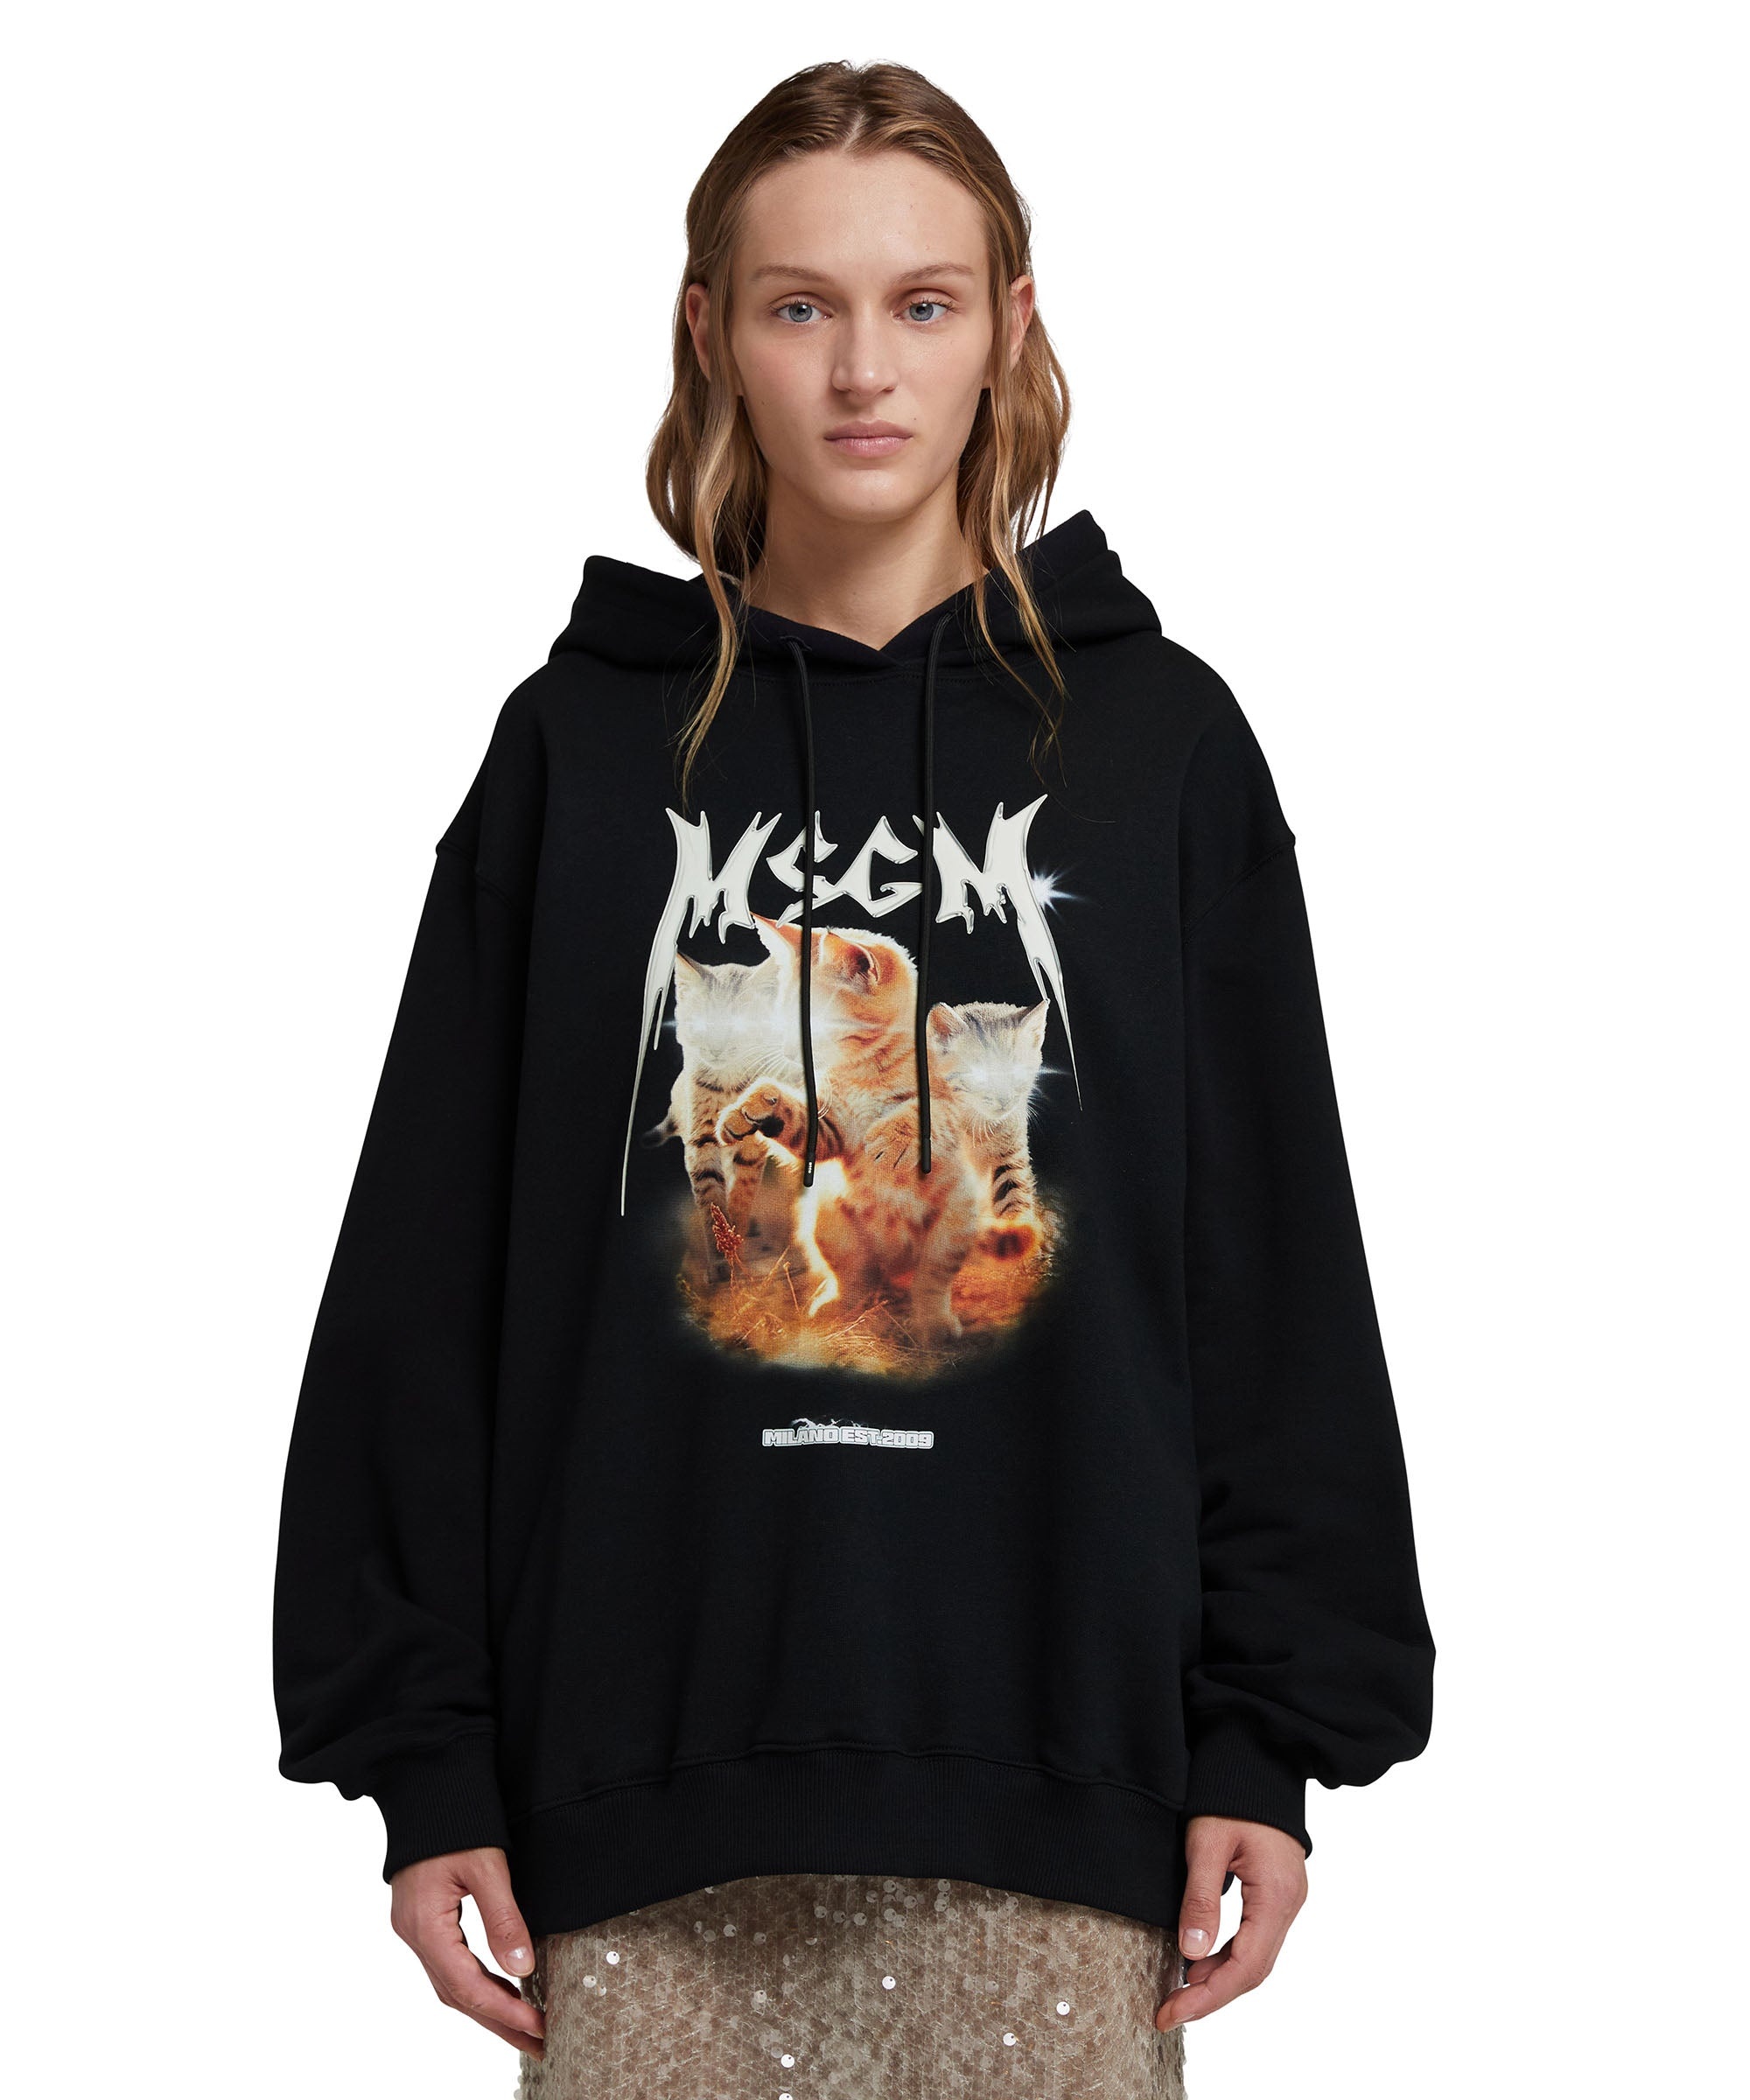 Hooded sweatshirt with "Laser eyed cat" graphic - 2